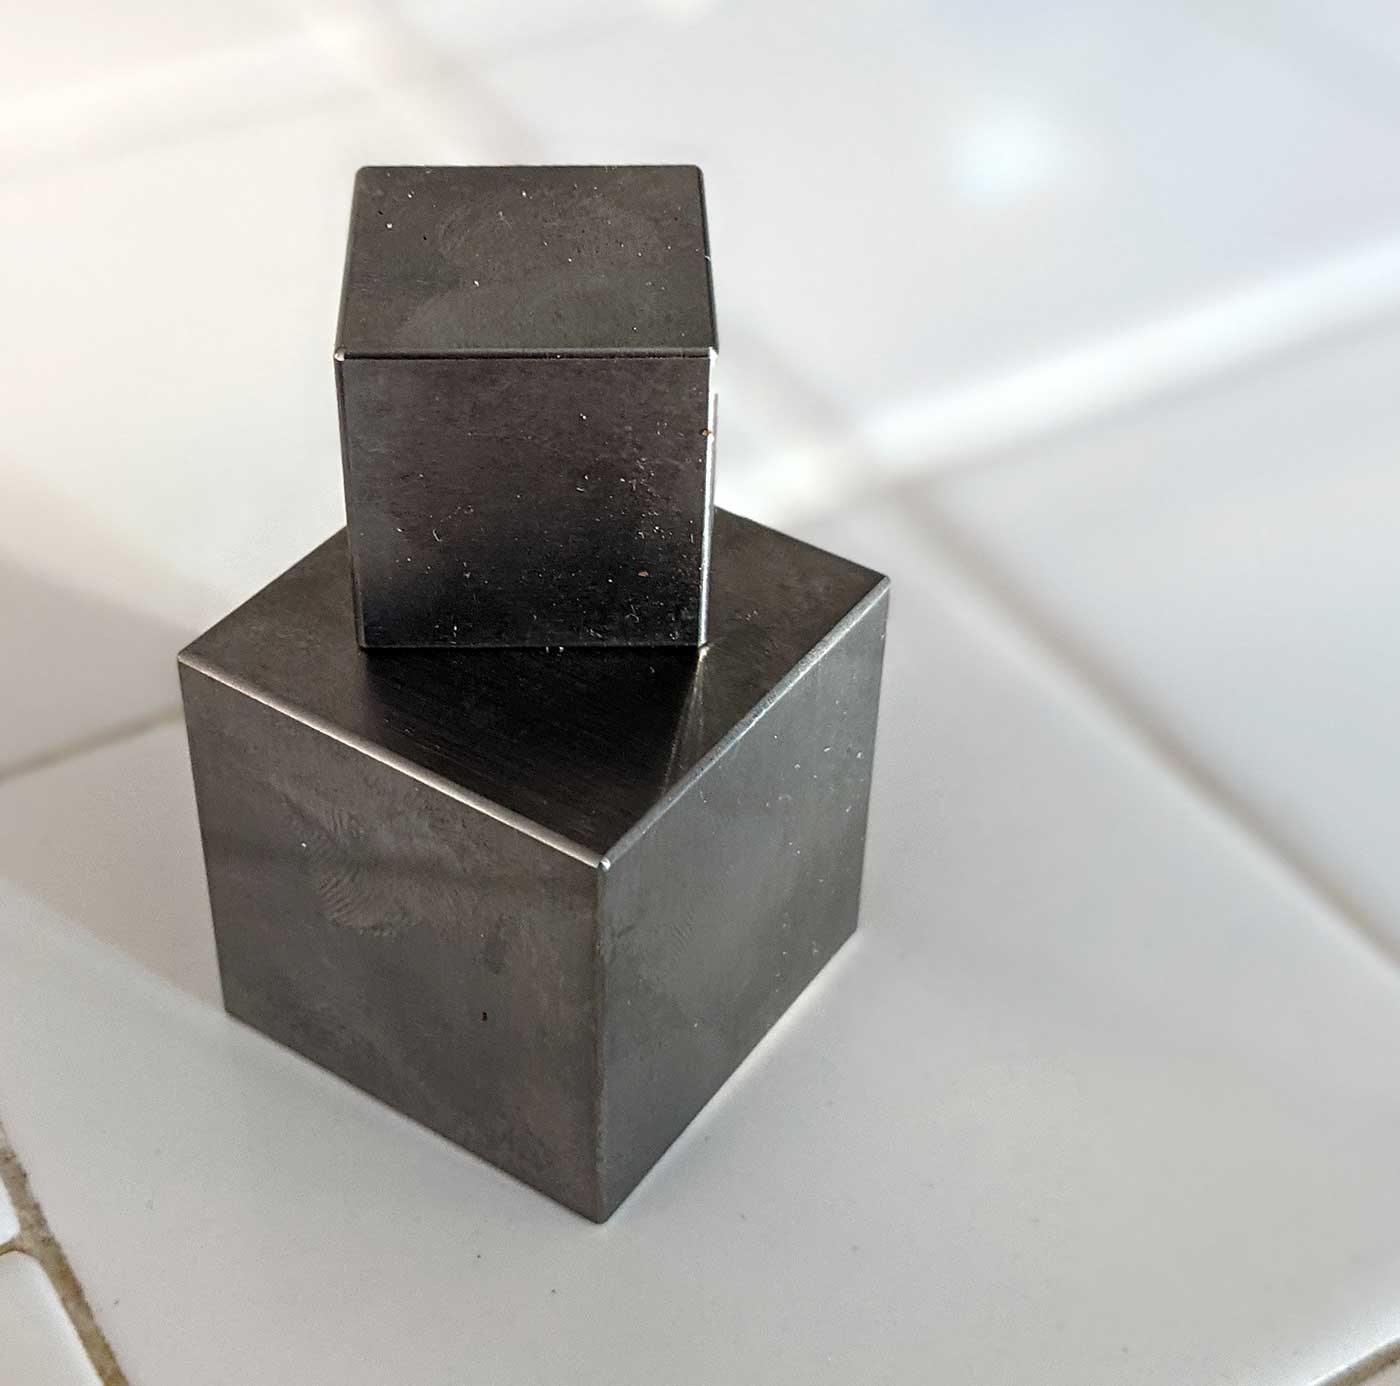 Tungsten Cubes For Sale: Why they’re Interesting